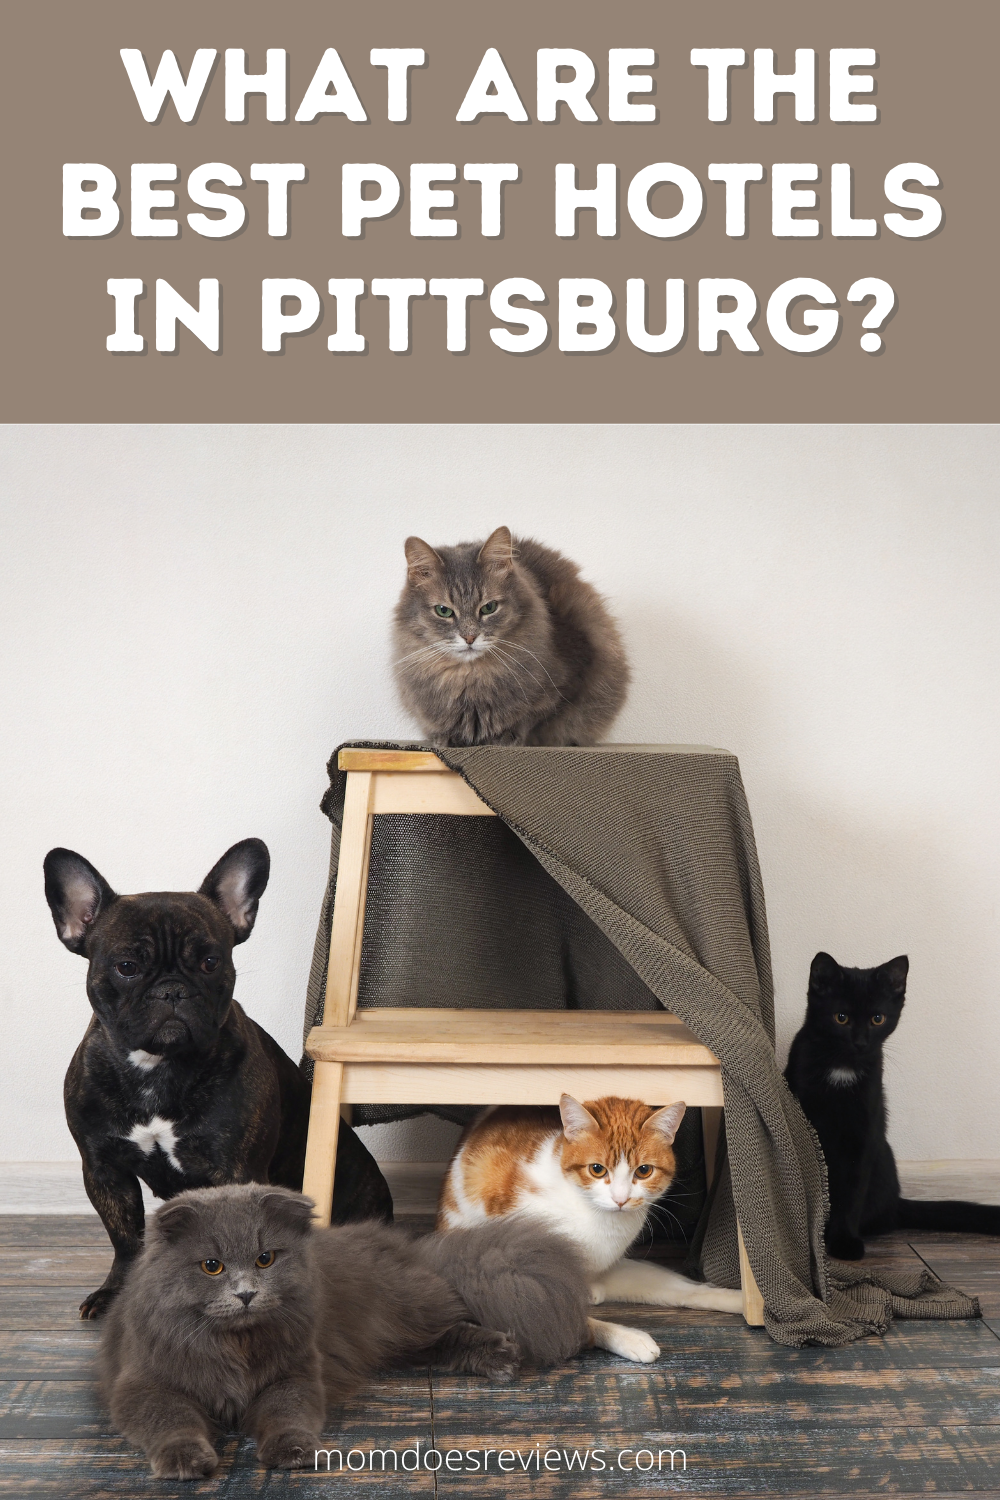 What Are The Best Pet Hotels In Pittsburg?